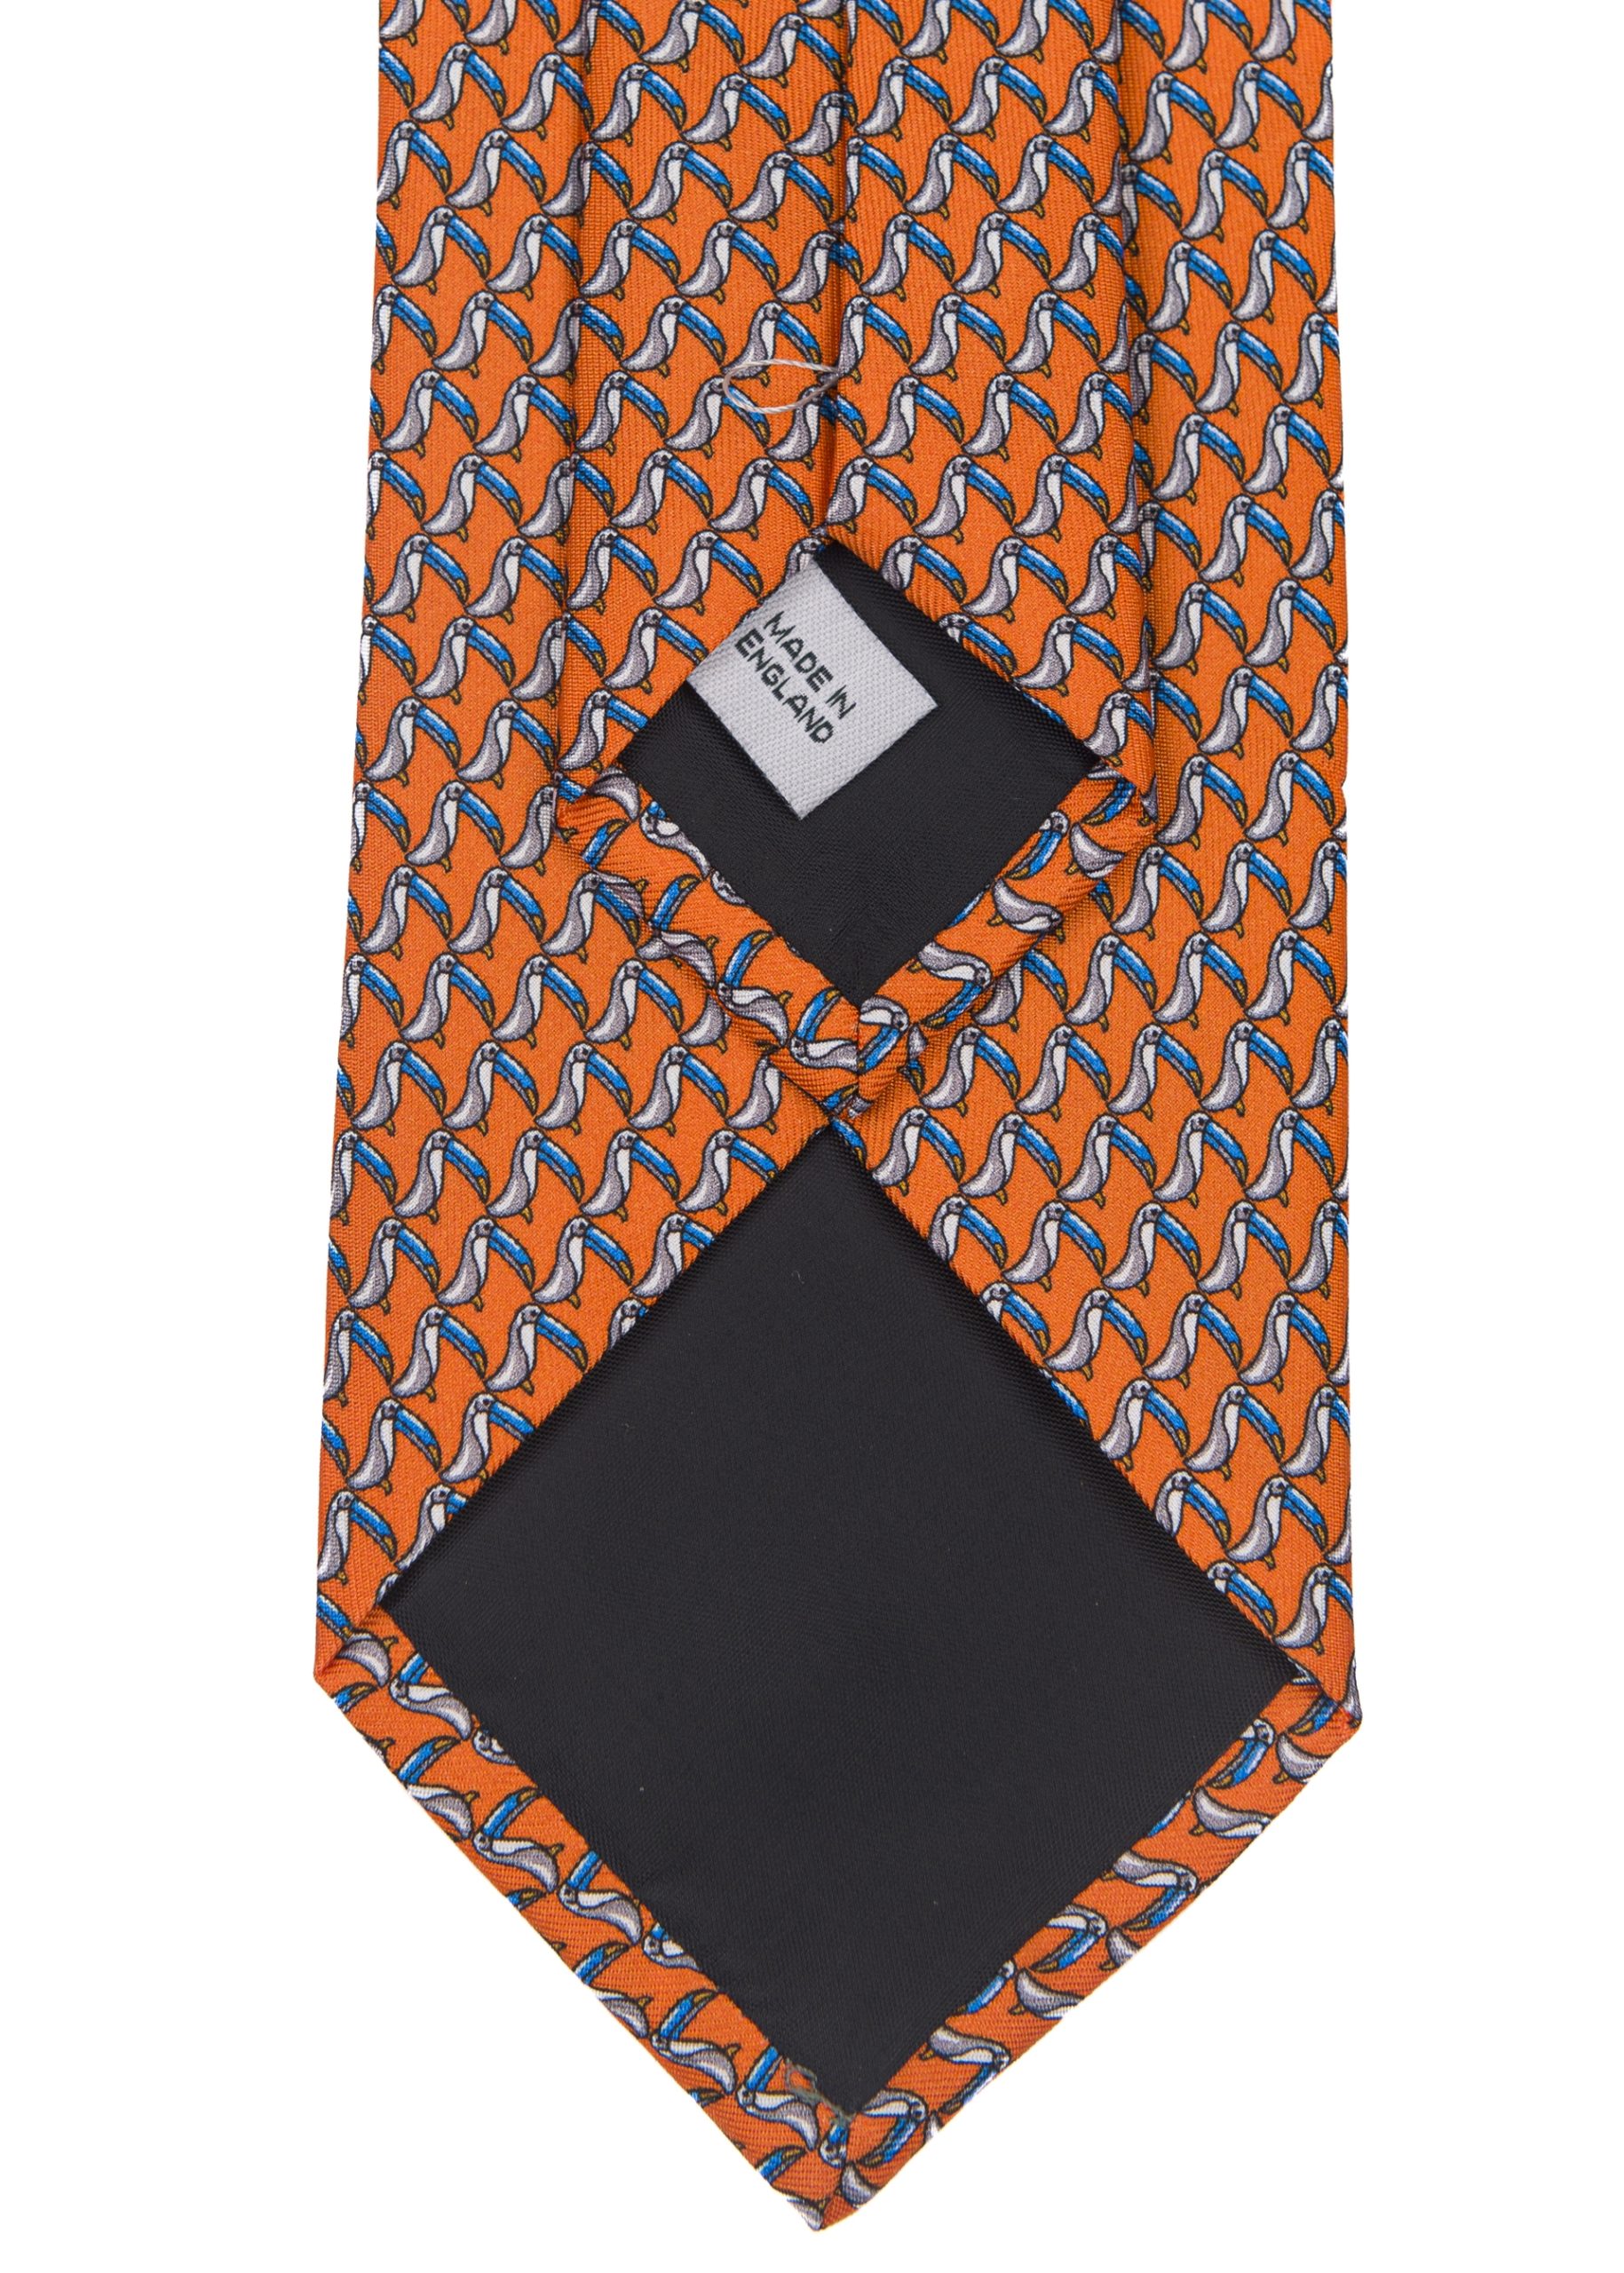 Roderick Charles toucan patterned tie